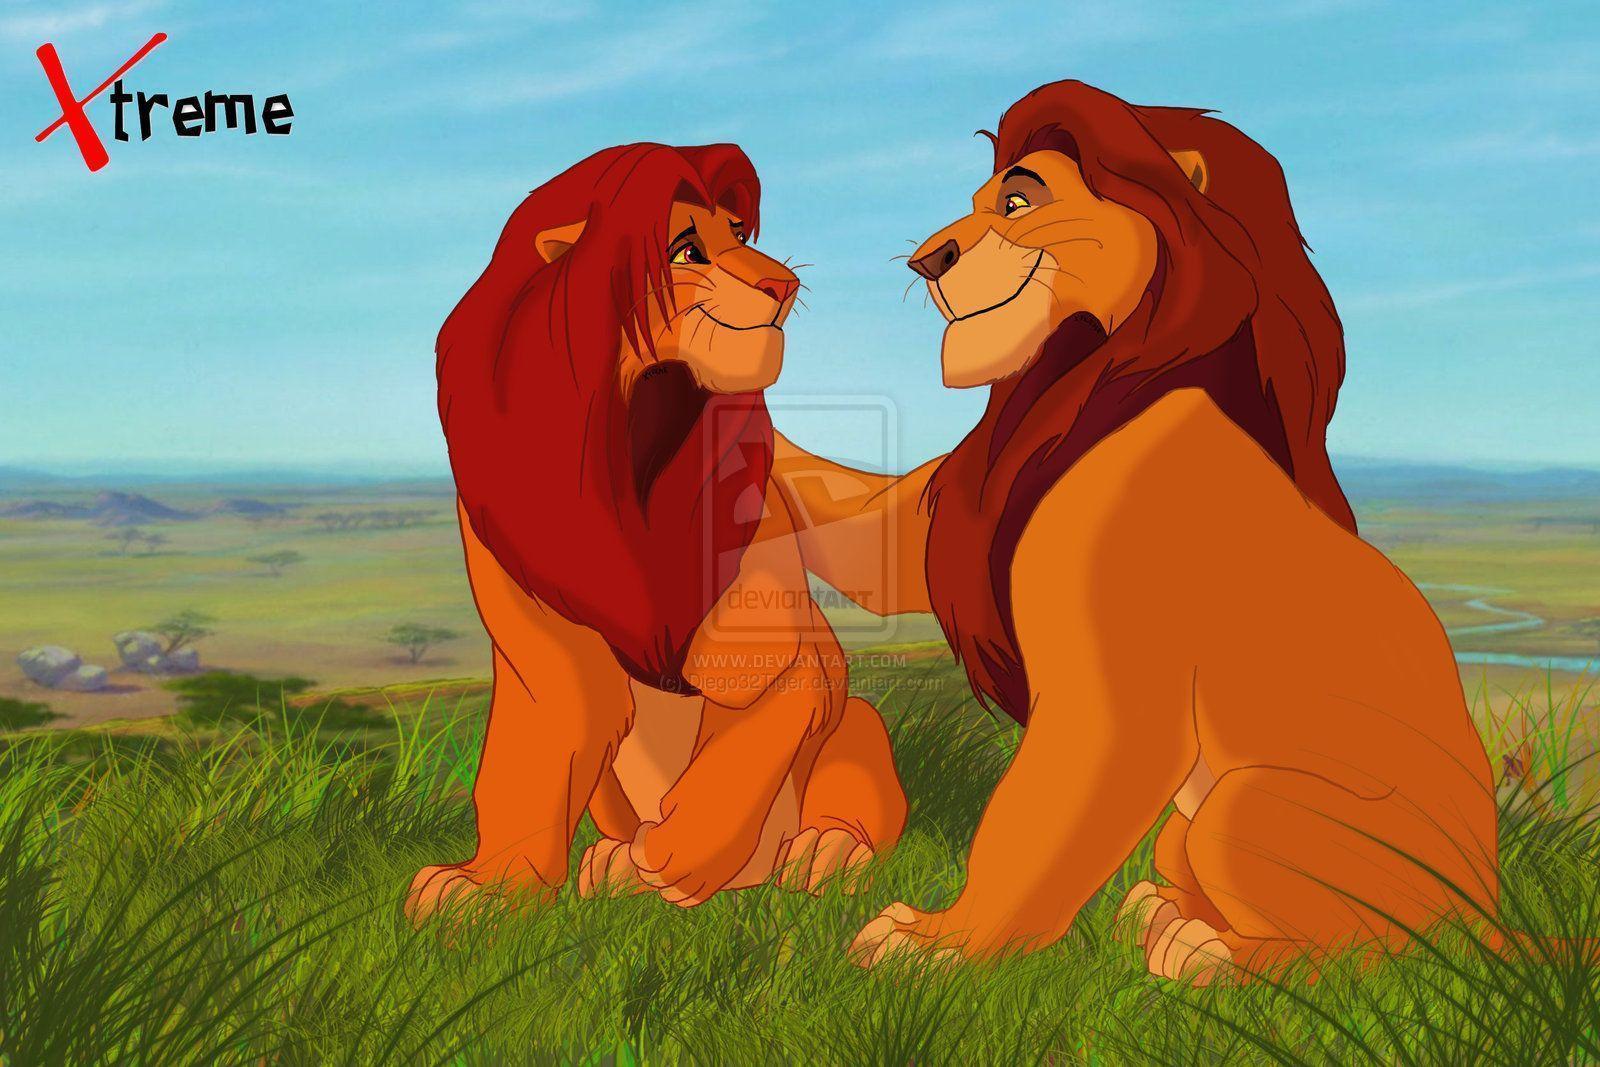 The Lion King Mufasa and Simba HD Wallpaper Image for PC